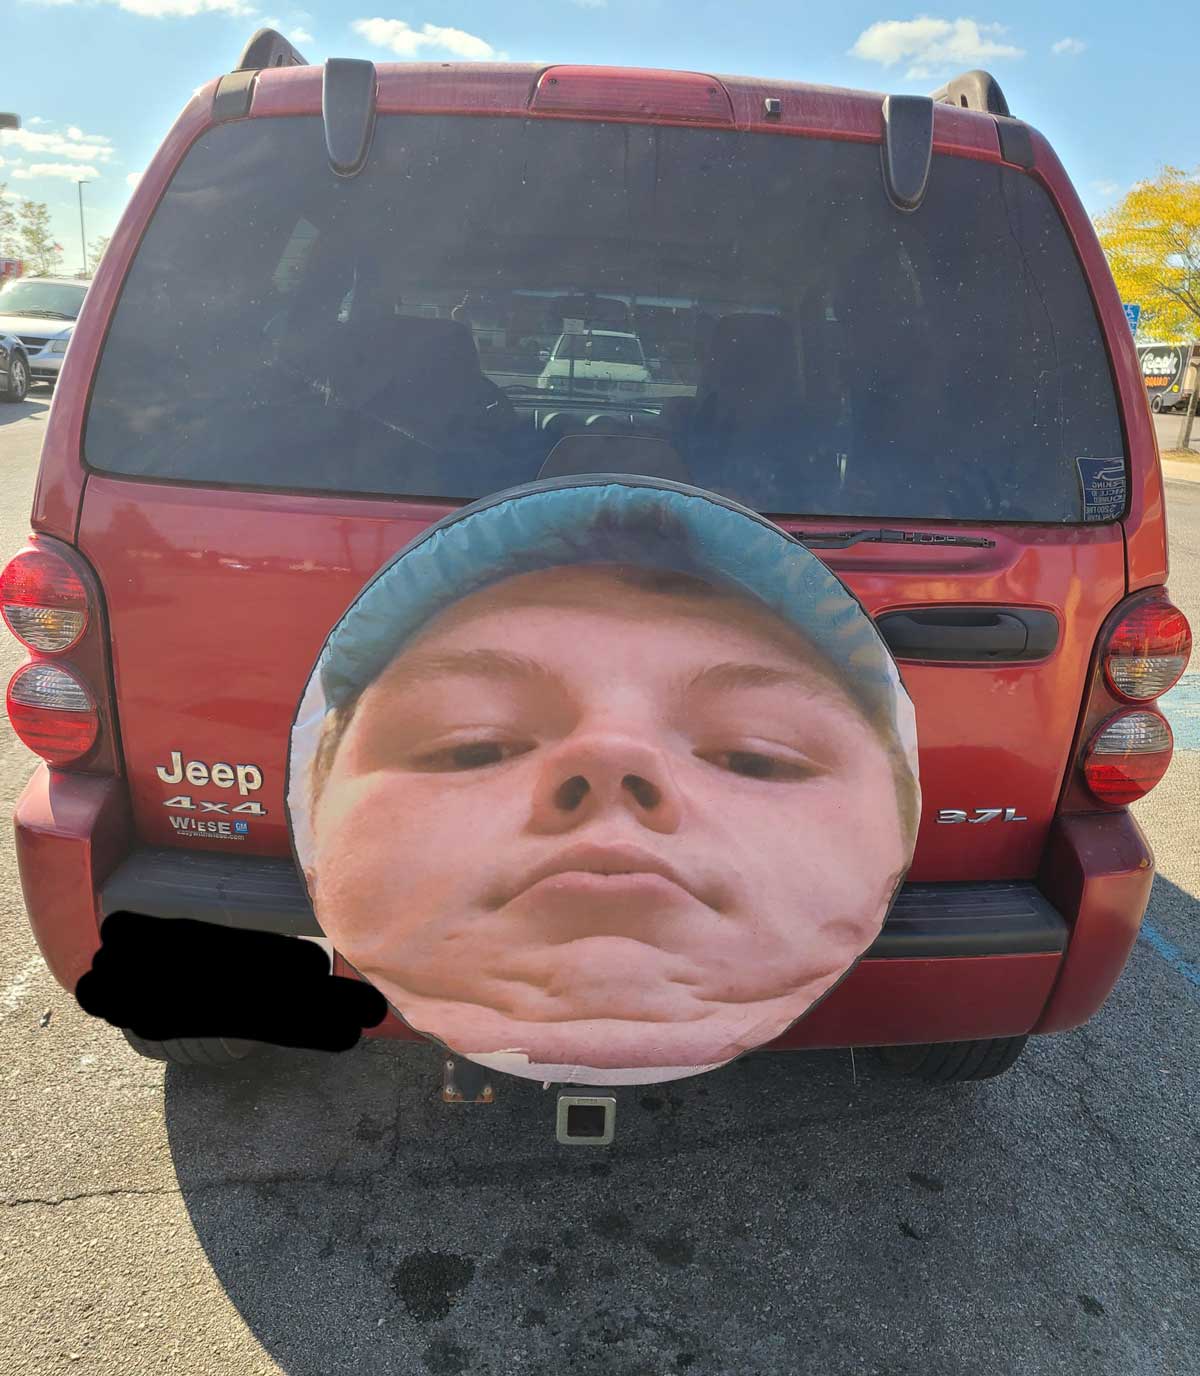 This guy's tire cover